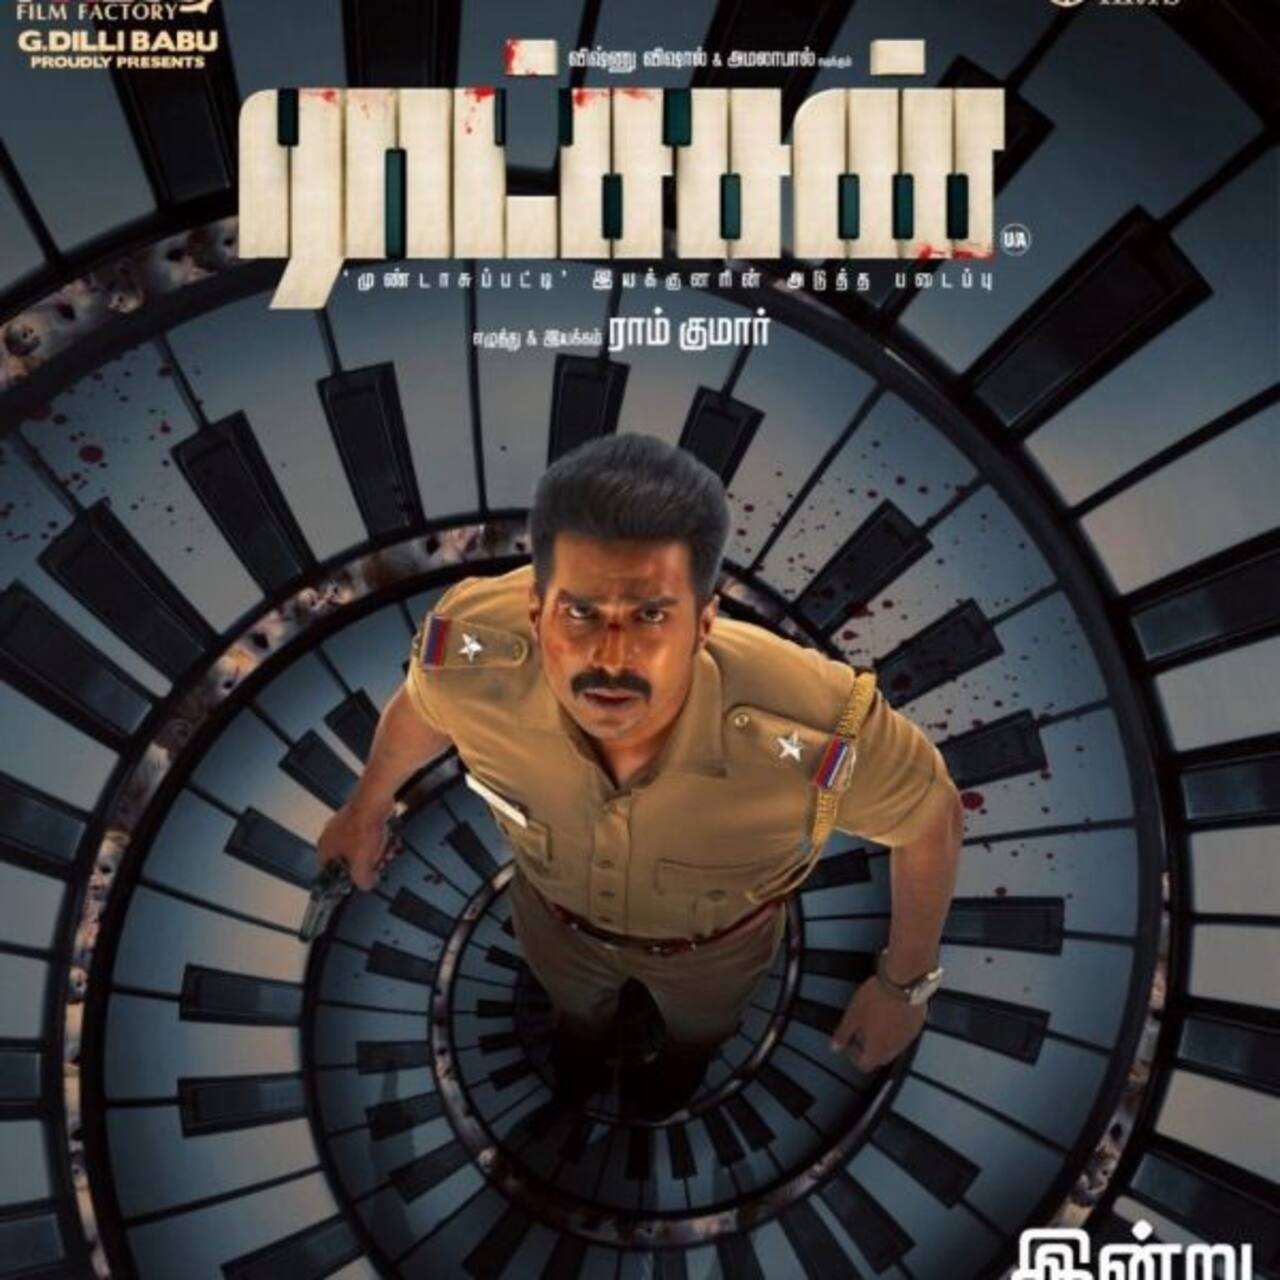 Ratsasan Public Review: This edge-of-the-seat thriller starring Vishnu Vishal and Amala Paul is the talk of the town